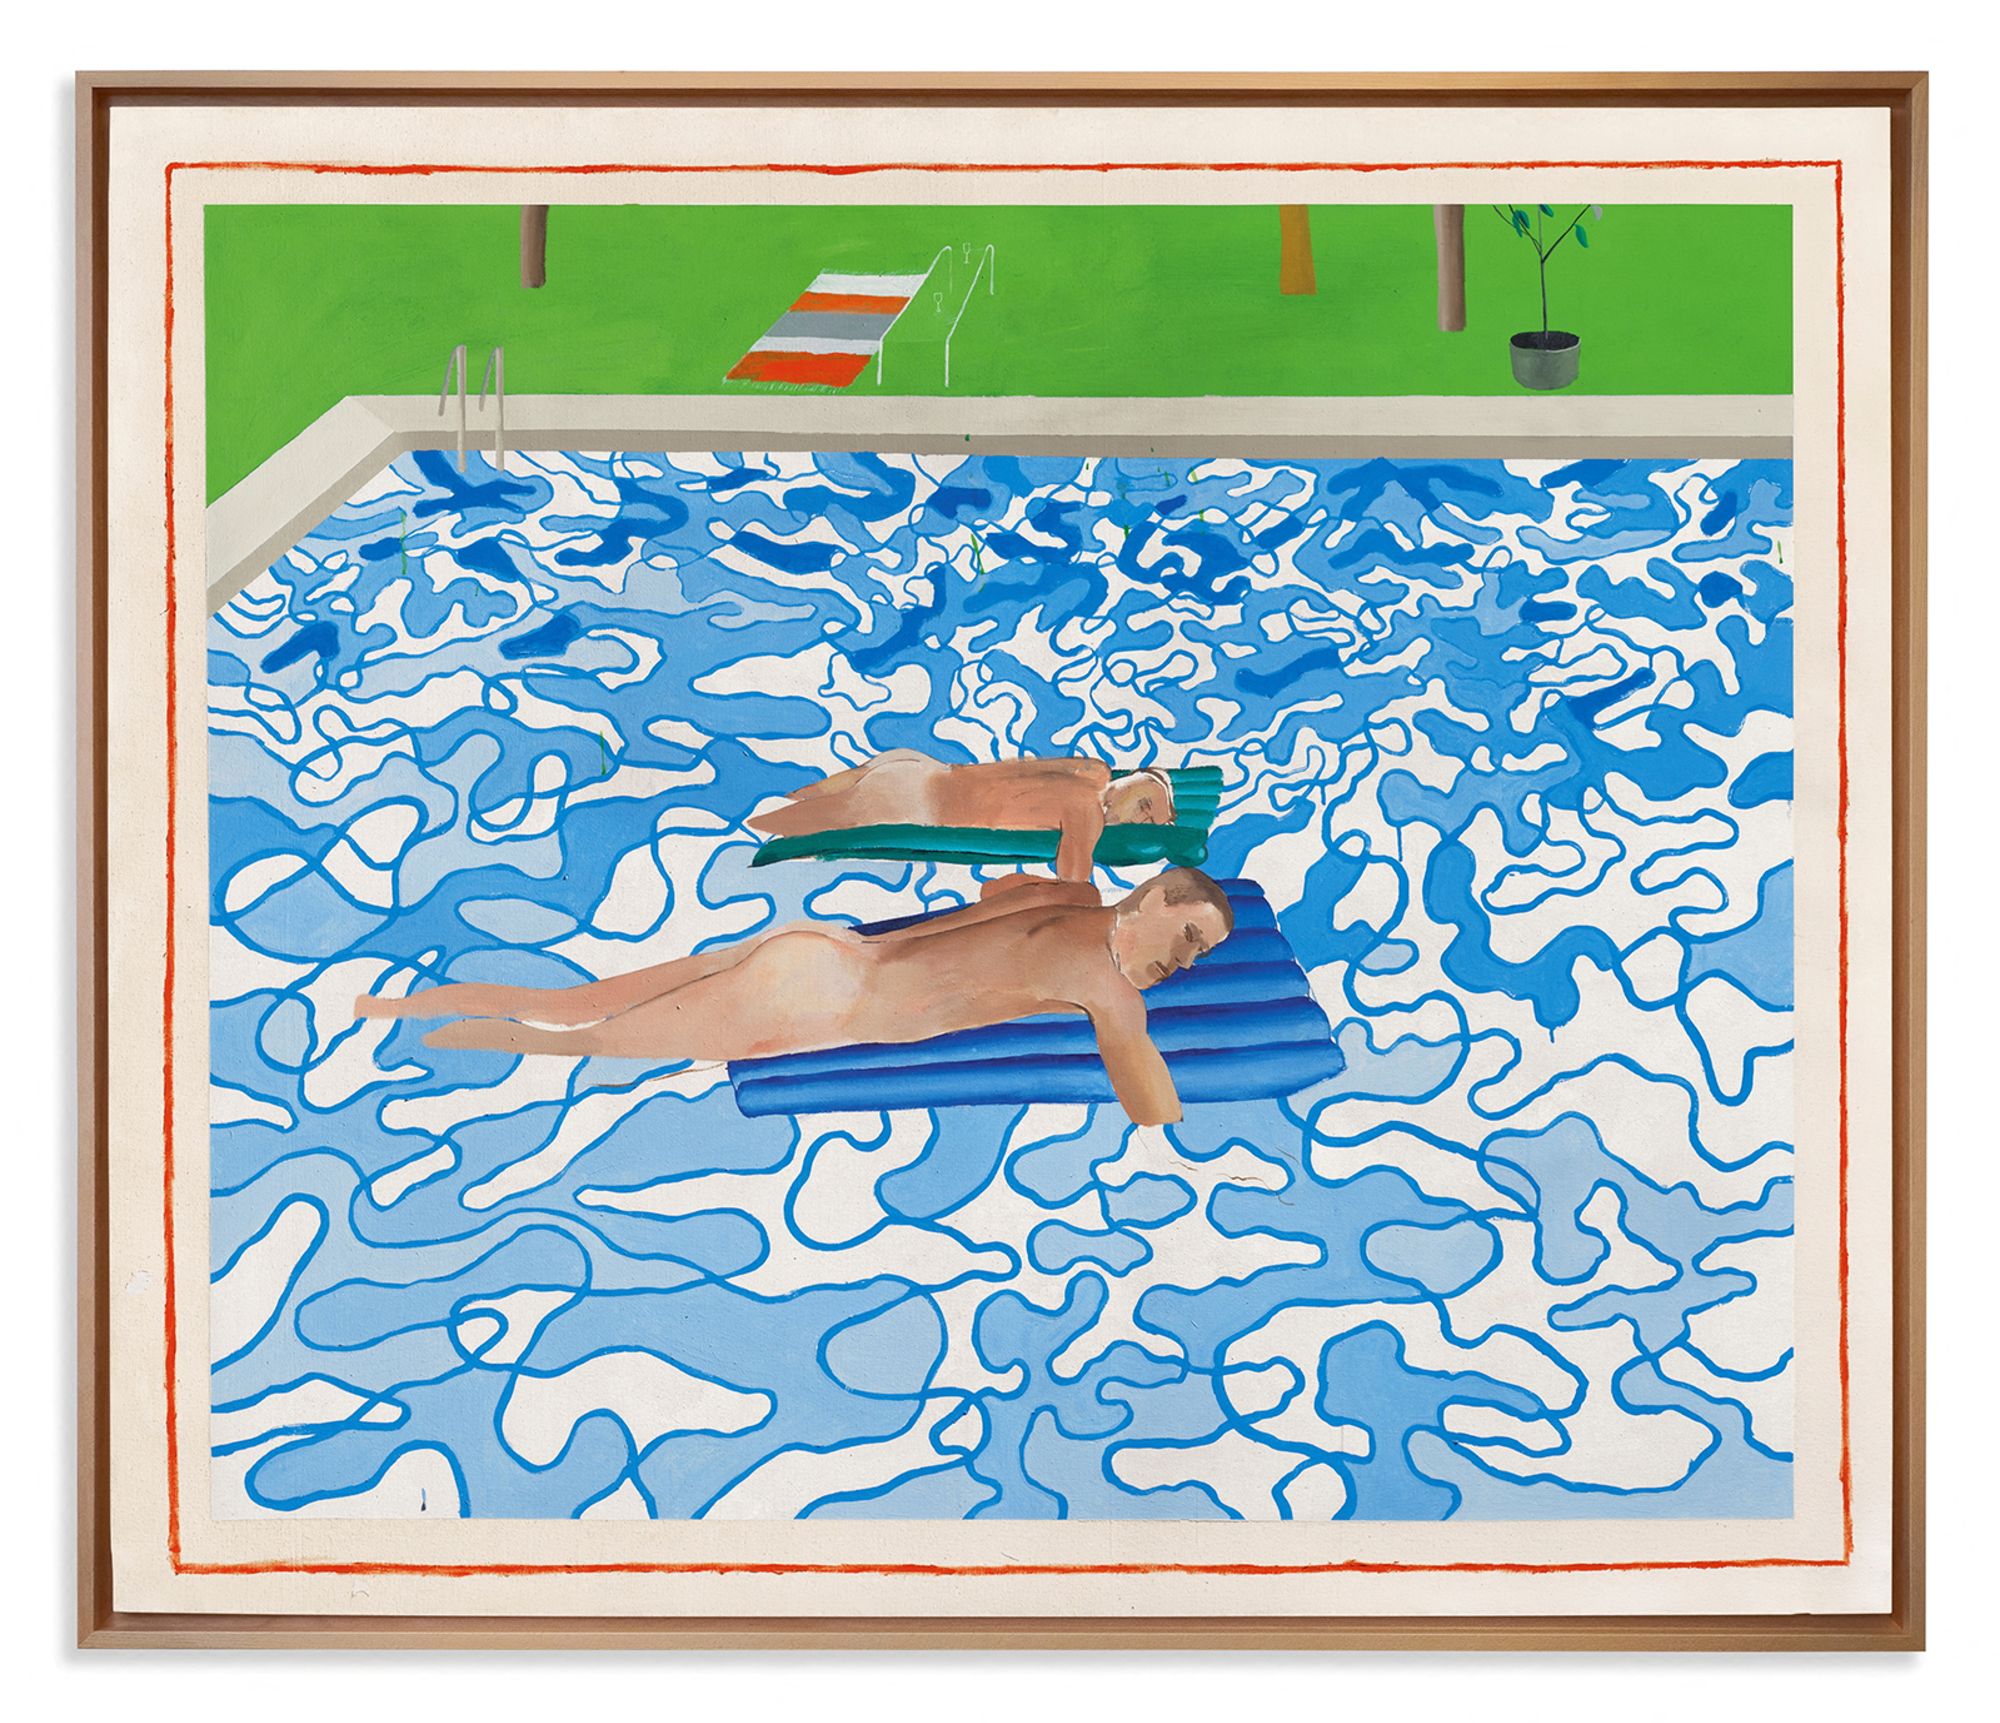 David Hockney painting 'California' expected to fetch up to $20 million